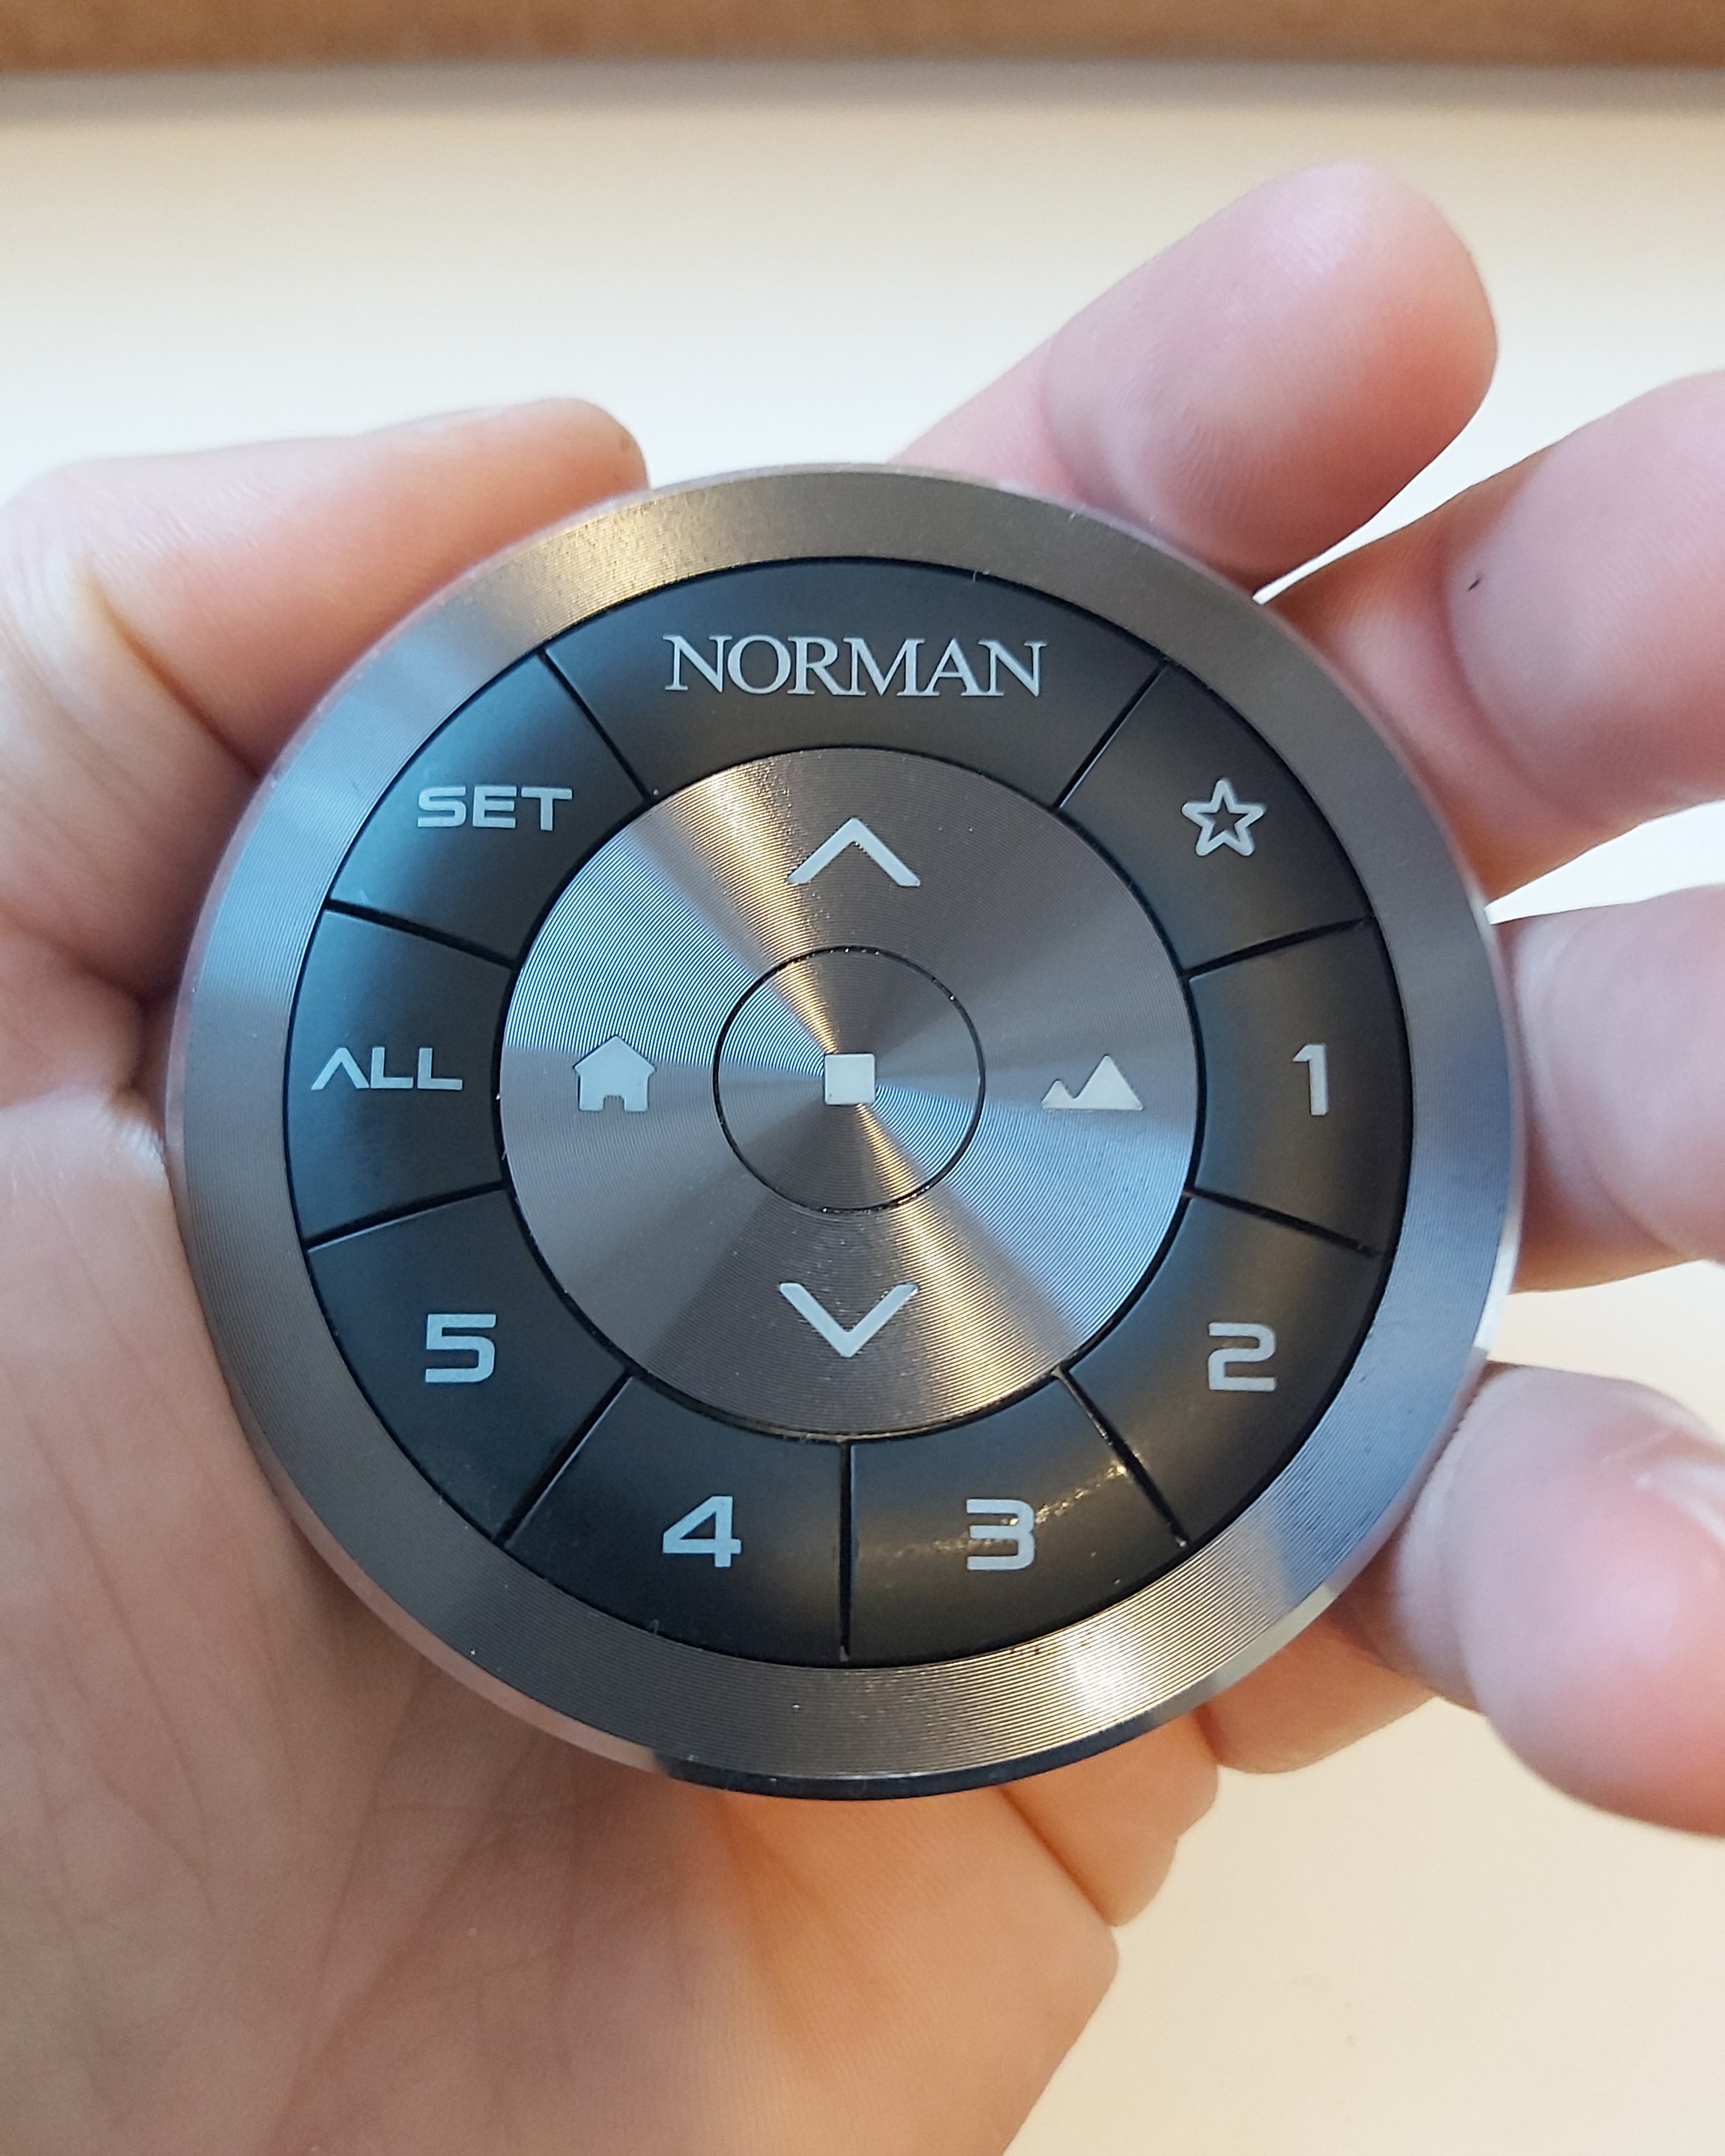 Norman smart dial remote control shutters